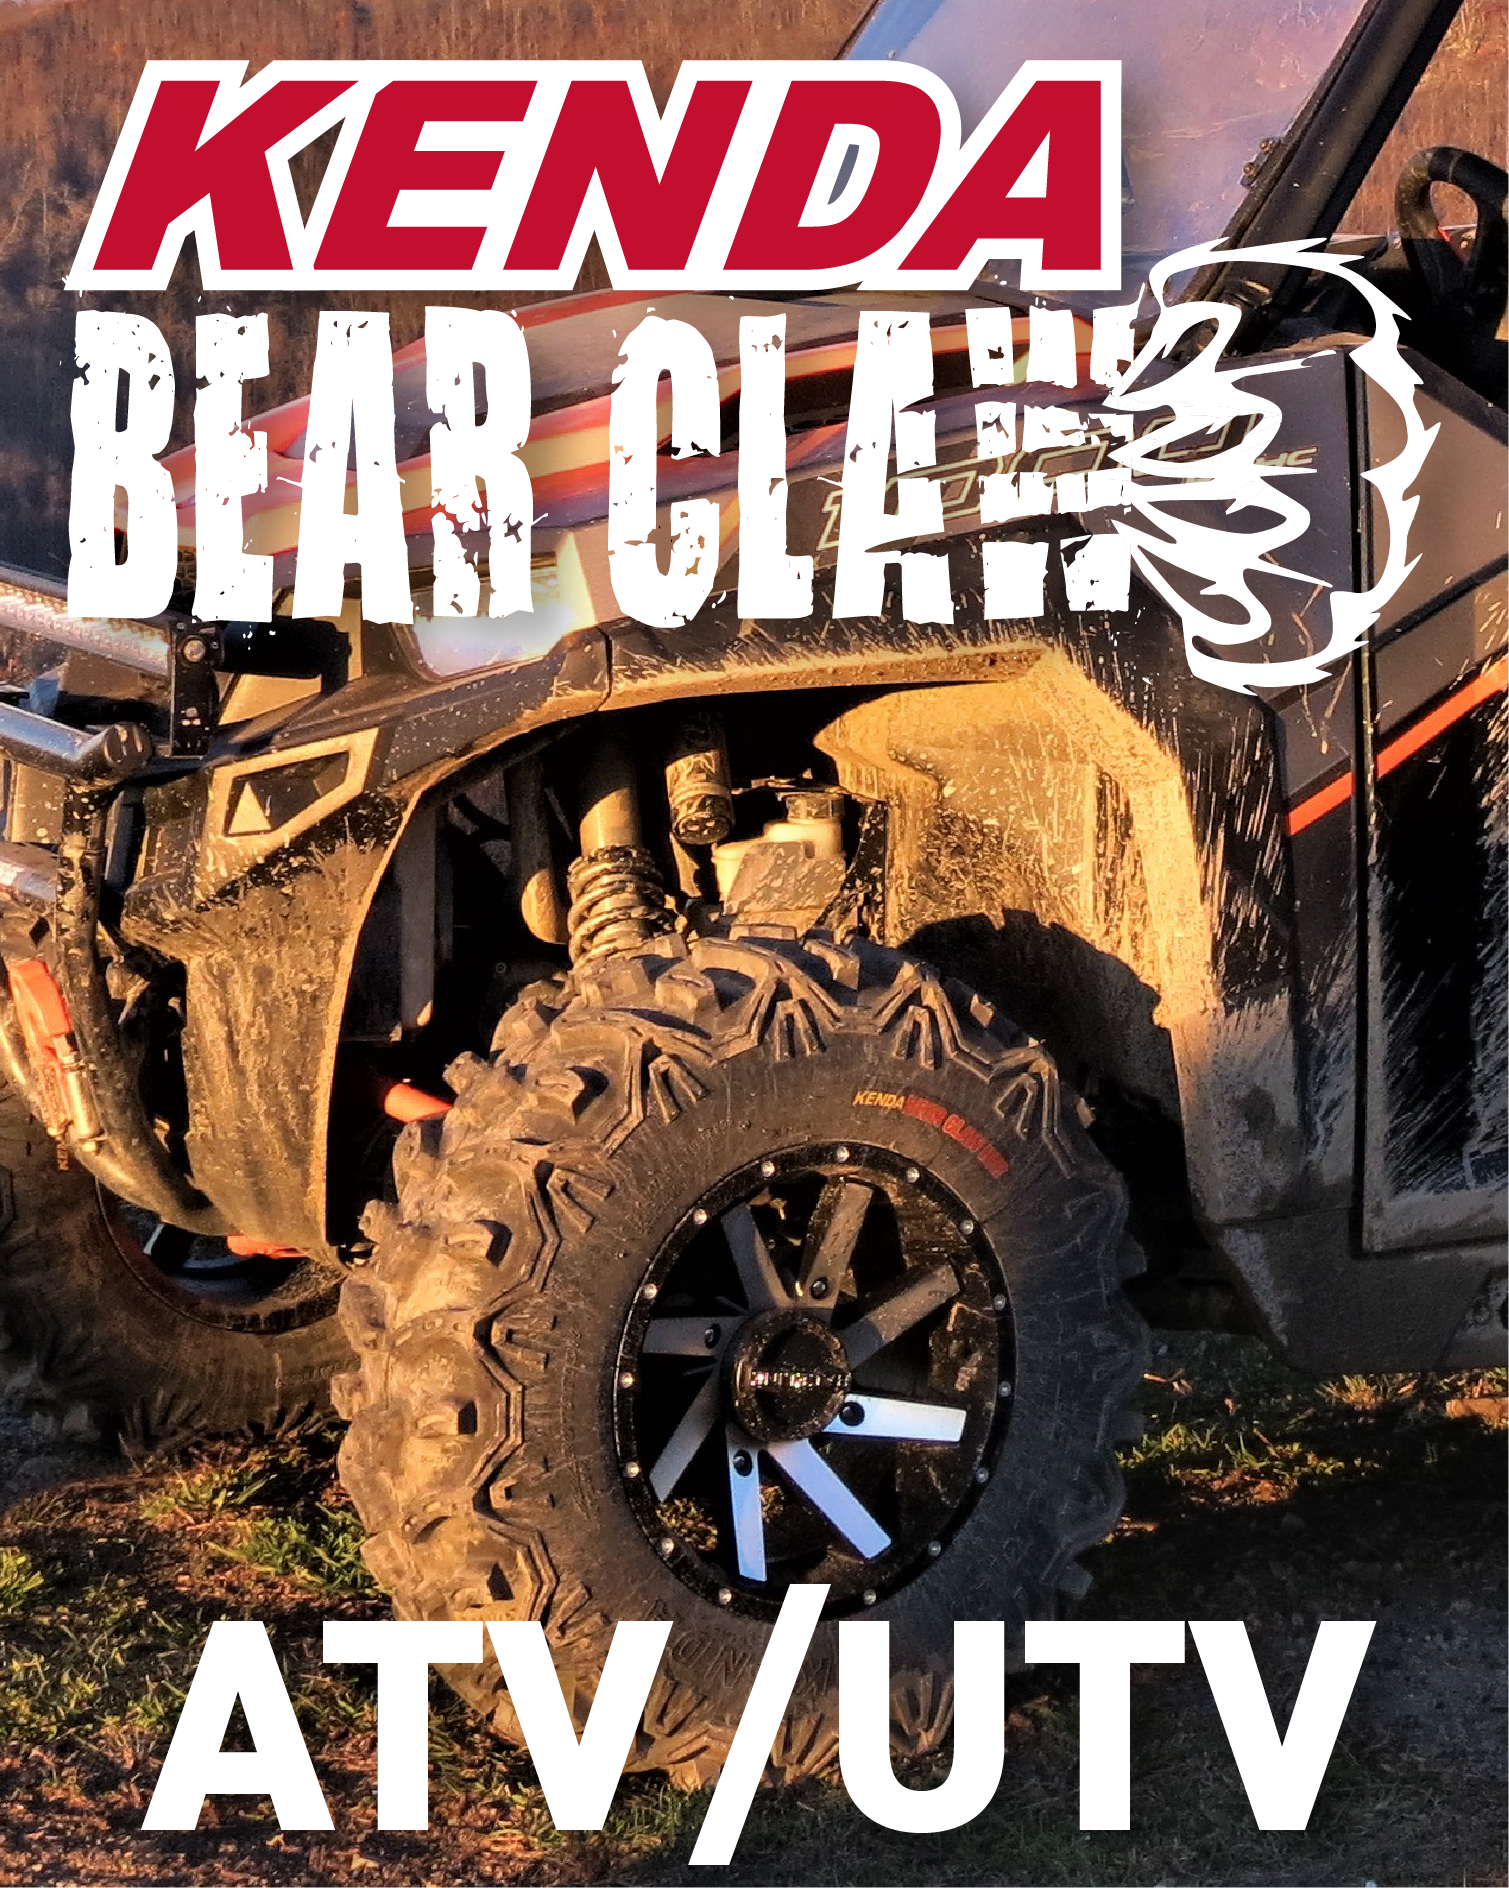 Kenda Bear Claw EX 27x10-12 Front ATV 6 PLY Tires Bearclaw 27x10x12 - 2 Pack